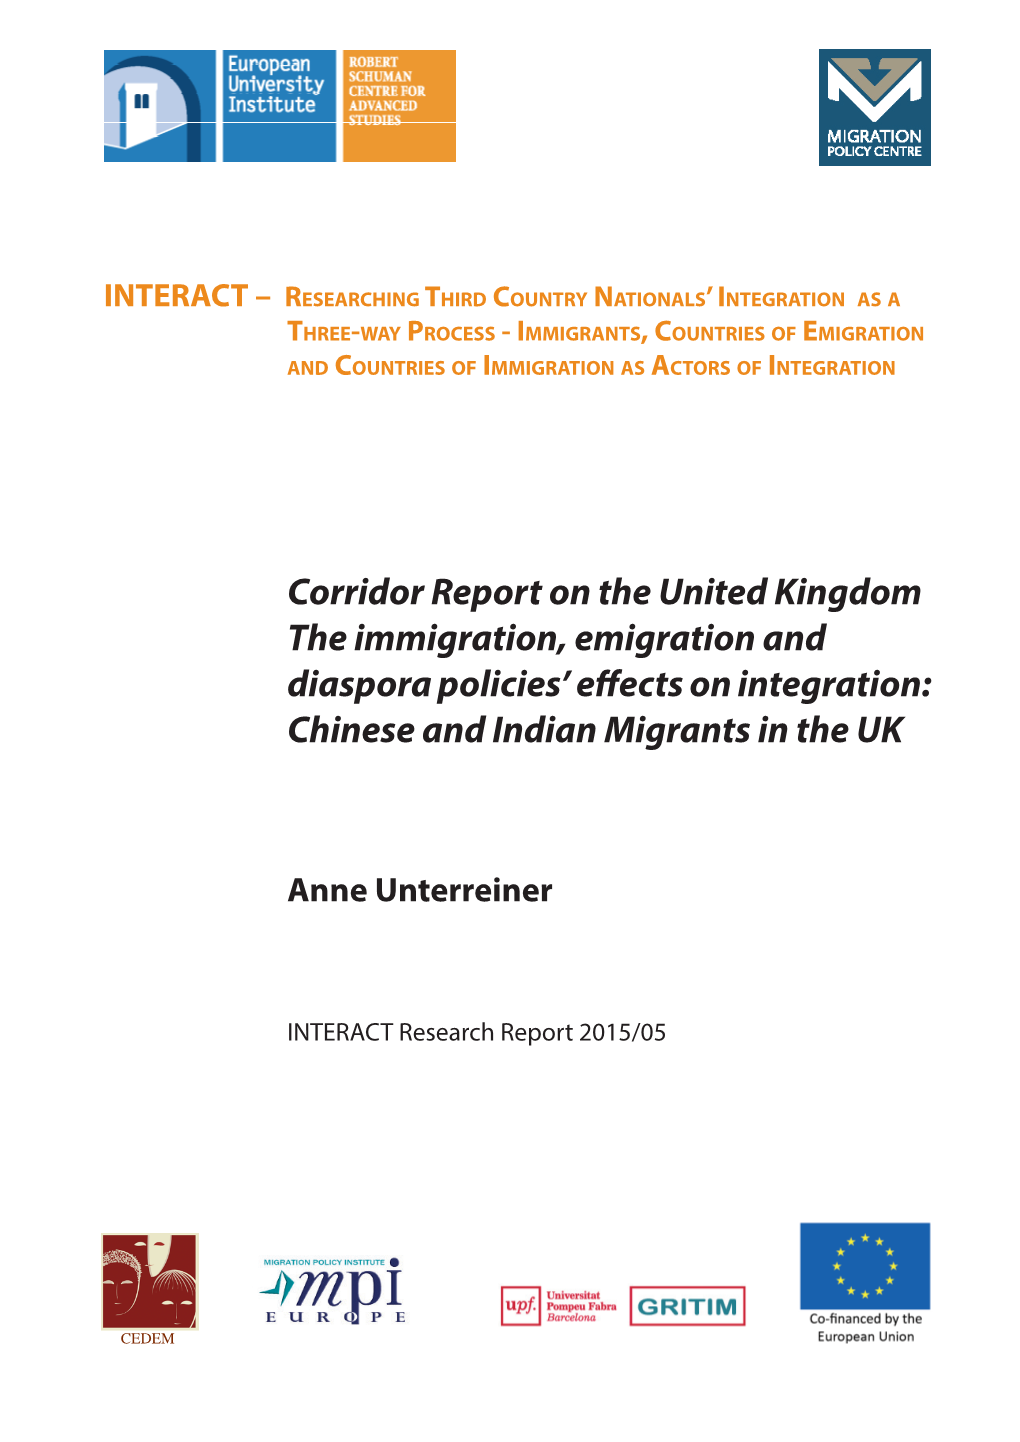 The Immigration, Emigration and Diaspora Policies’ Effects on Integration: Chinese and Indian Migrants in the UK